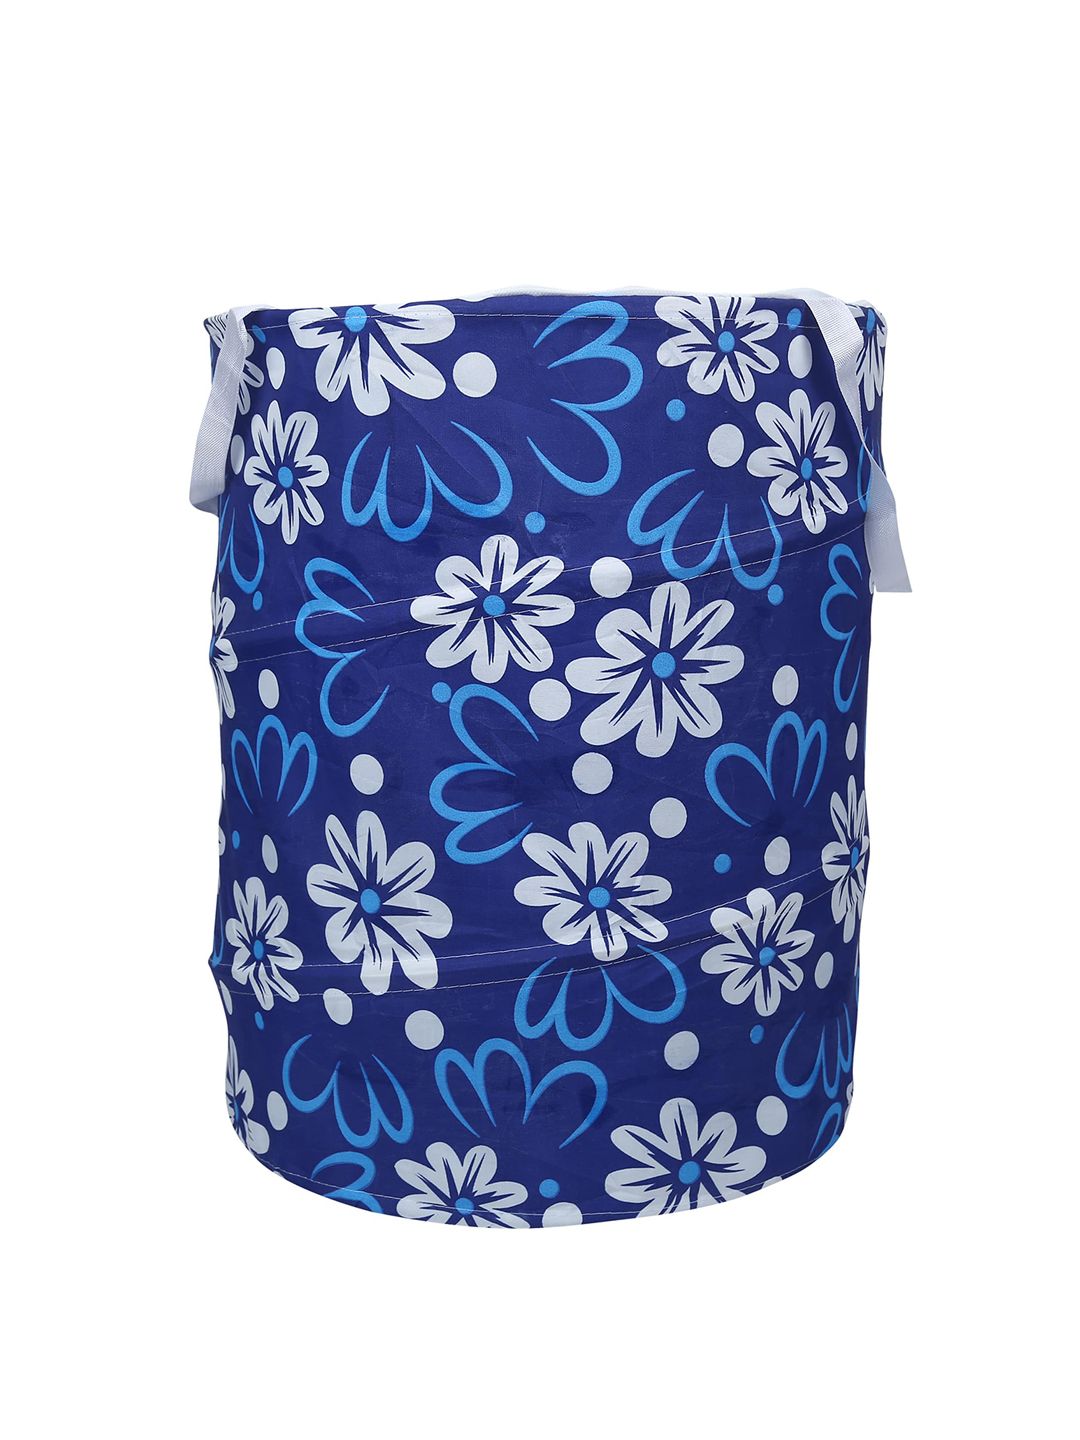 Clasiko White & Blue Printed Laundry Bag Price in India